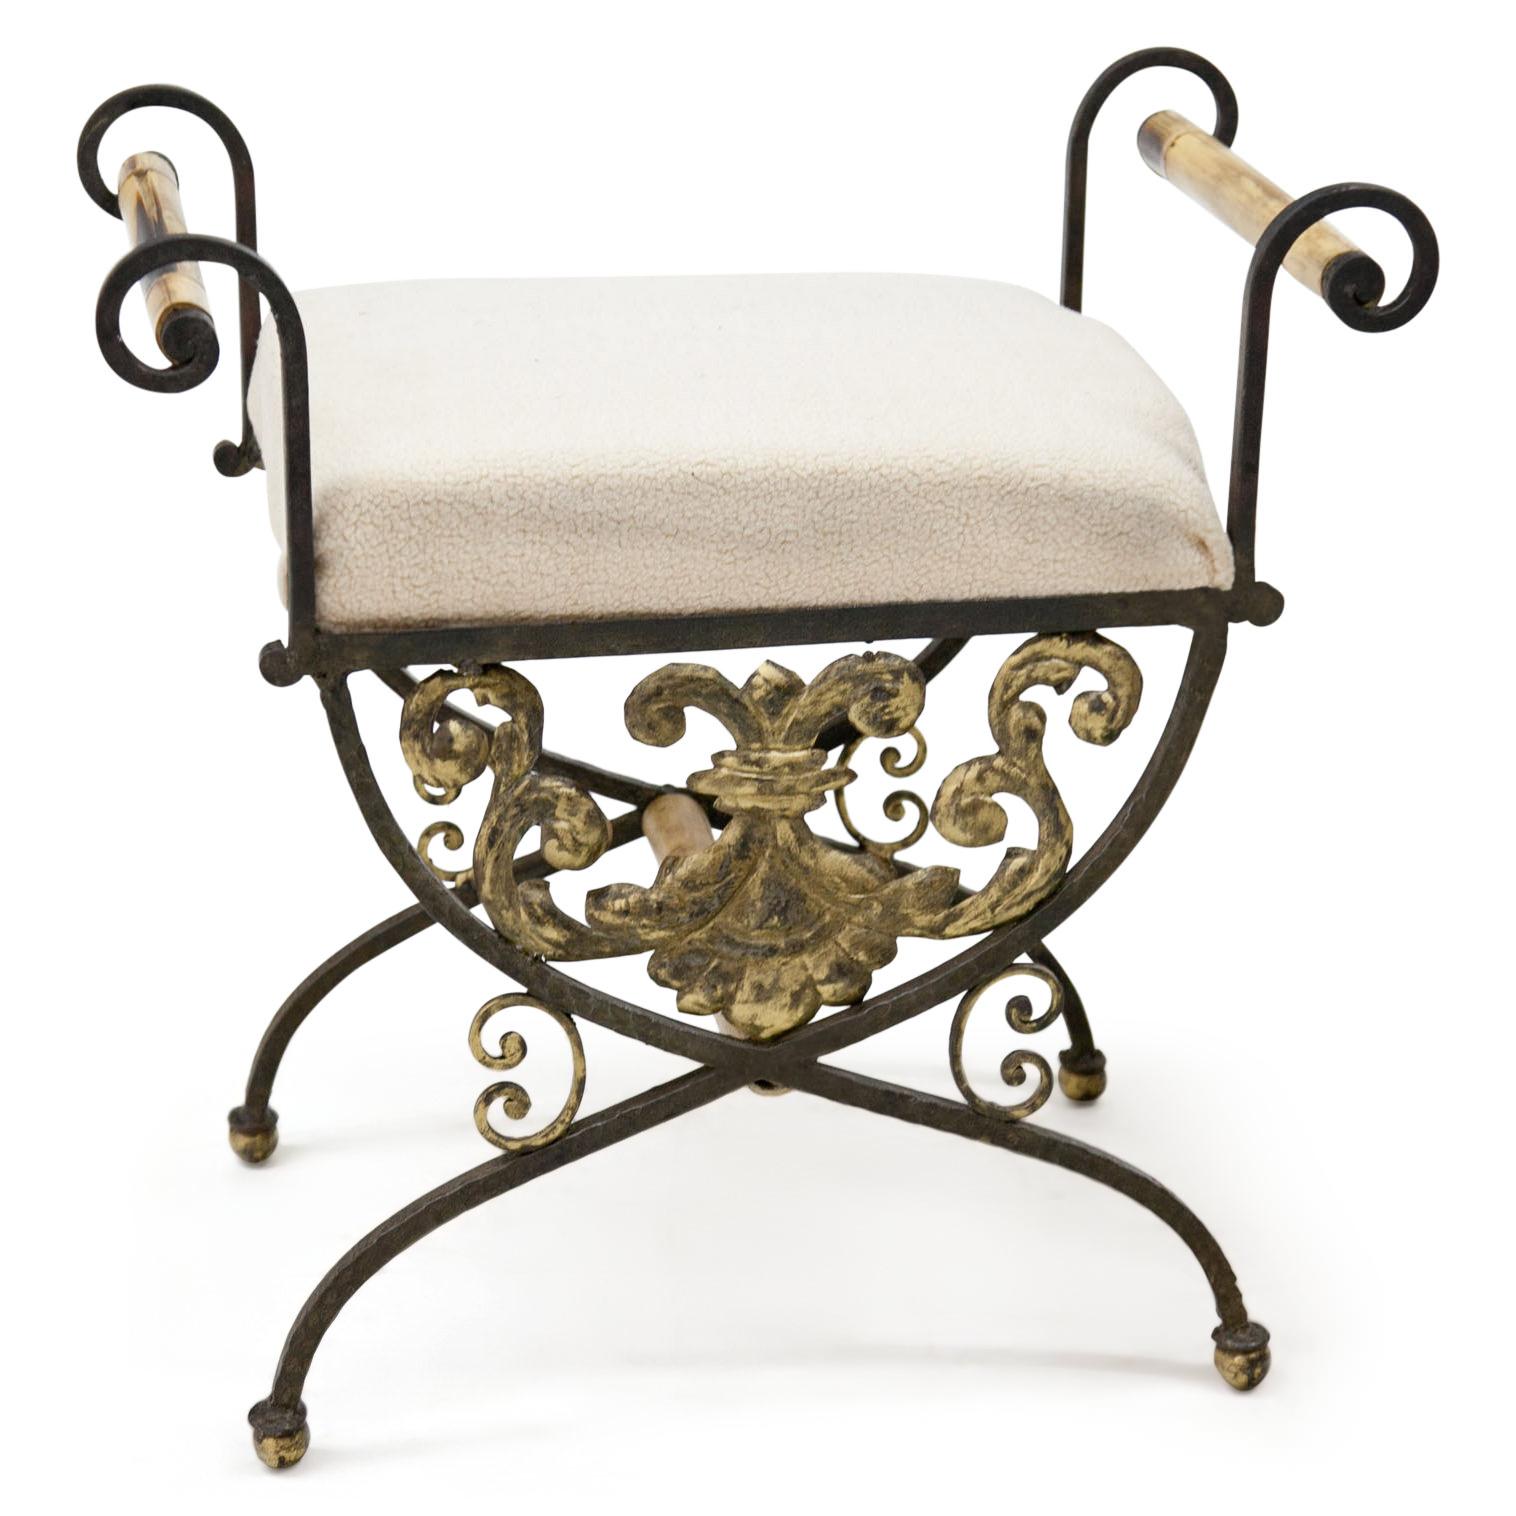 Pair of curule tabourets made of iron with a gold painted leaf-ornaments and C-buckles. The armrests are out of bamboo.